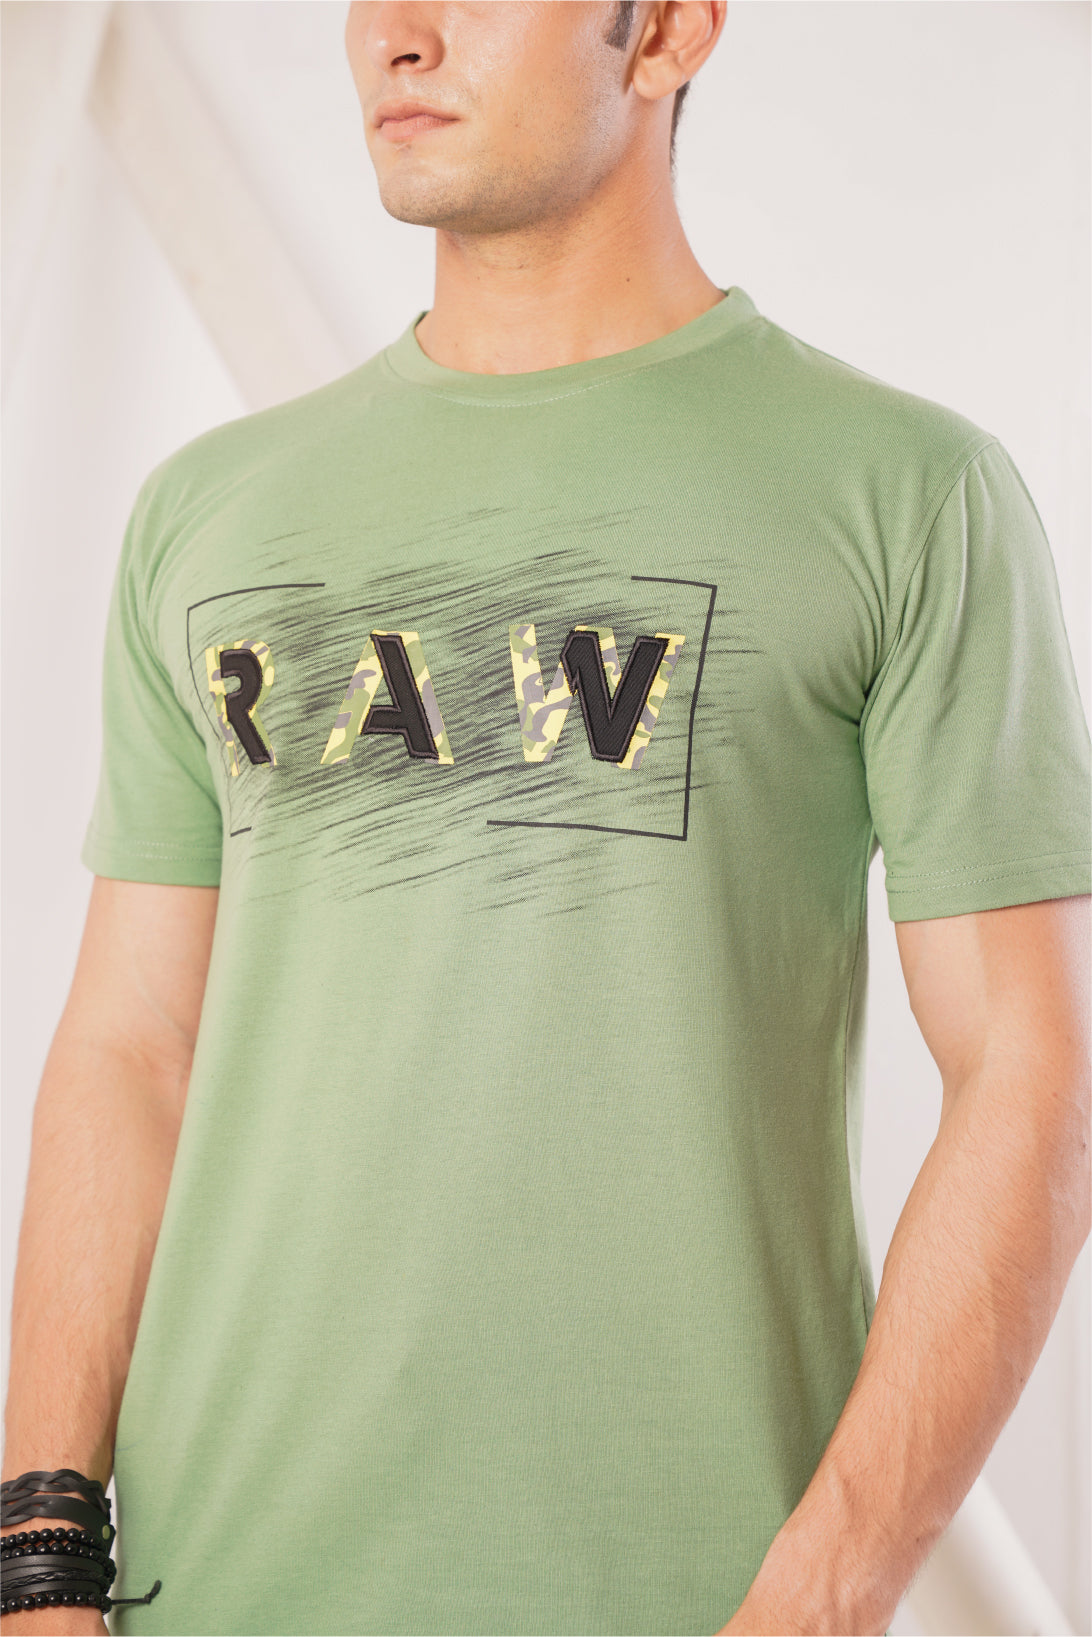 BAYOU ARTISTIC TEE WITH APPLIQUE SUPPORT